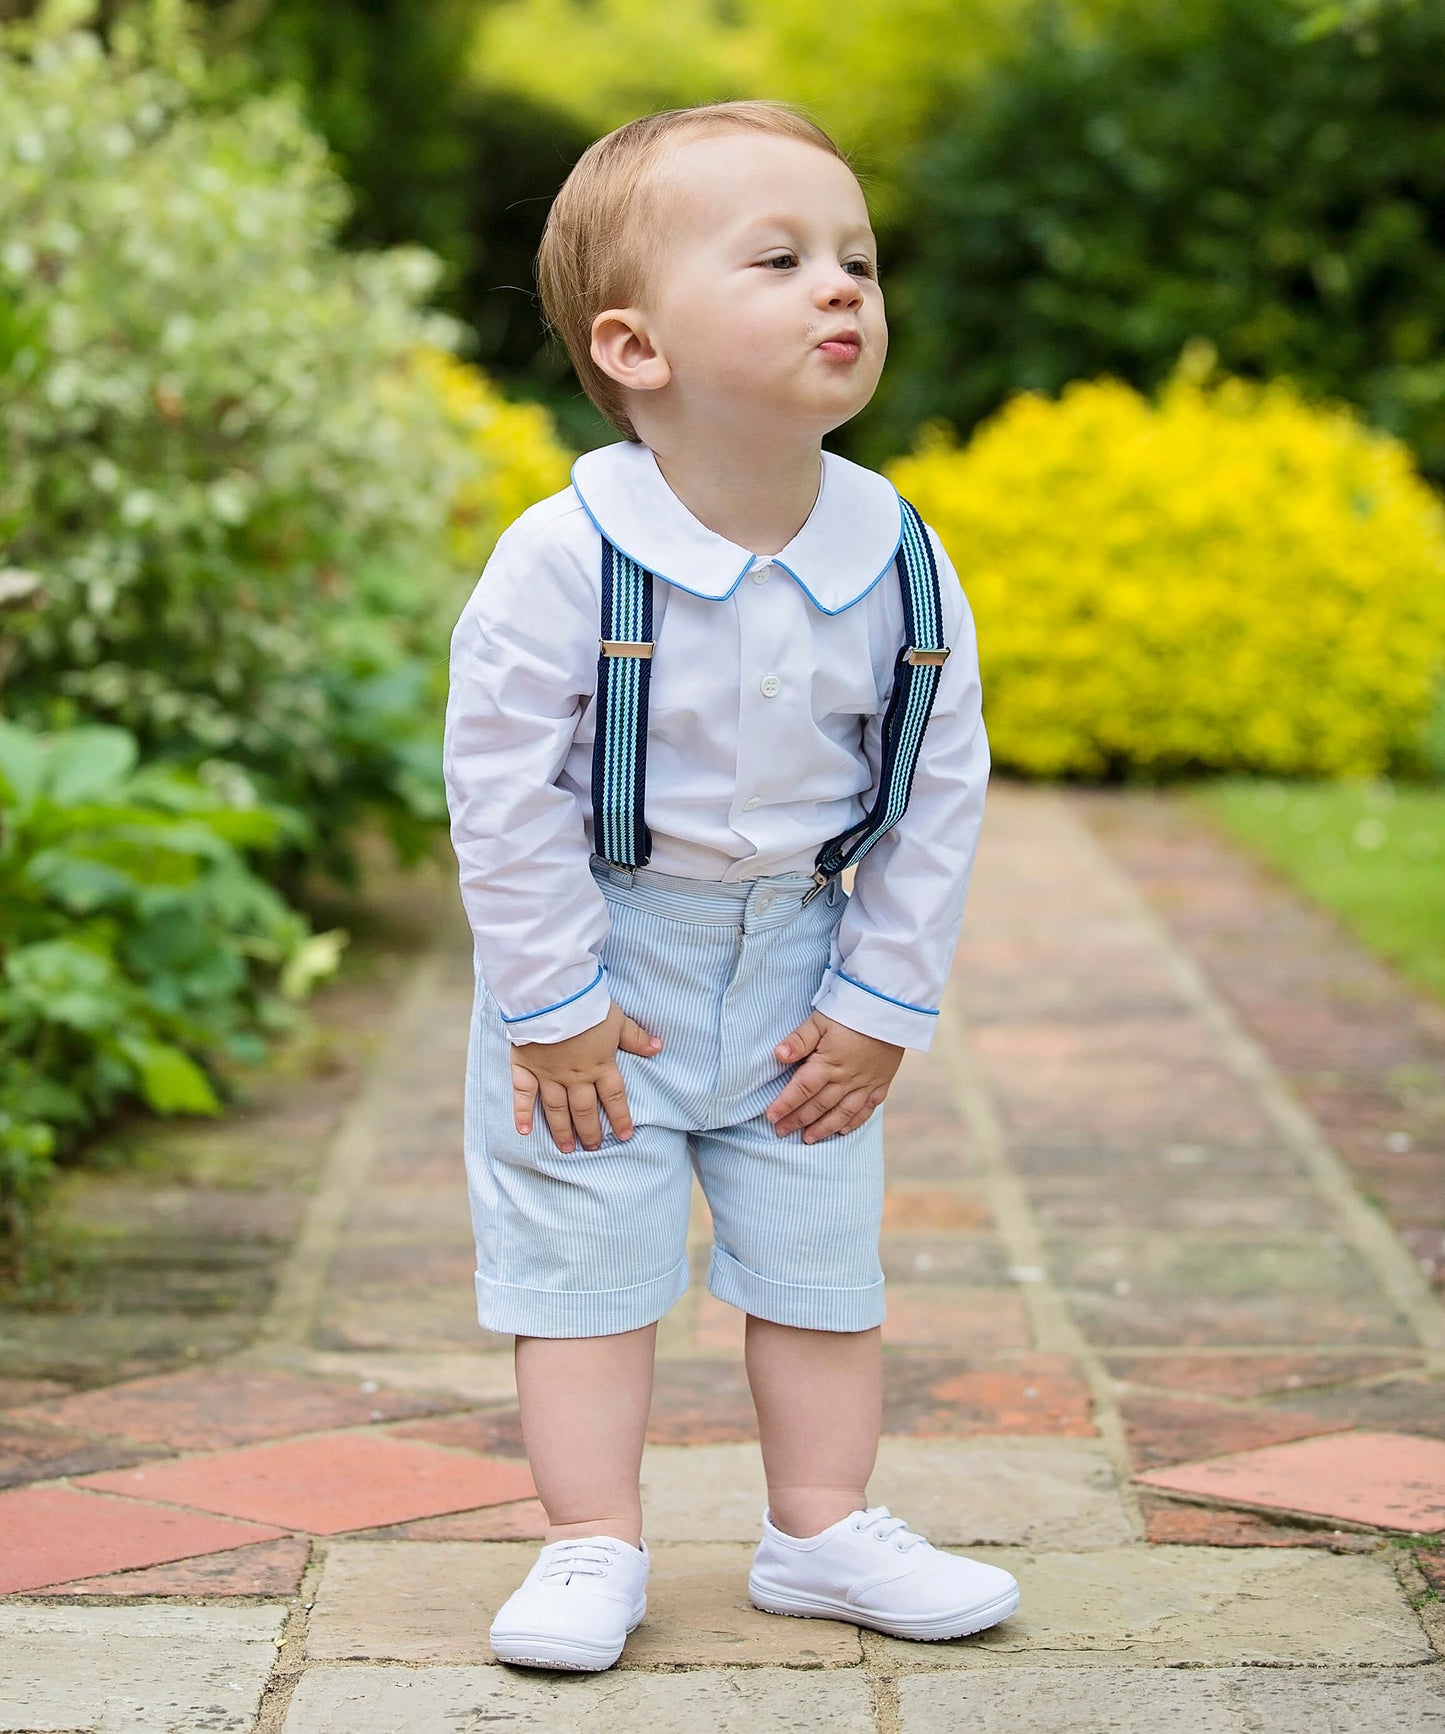 Amelia Brennan - Page Boy outfit with braces, shorts and blue piped shir